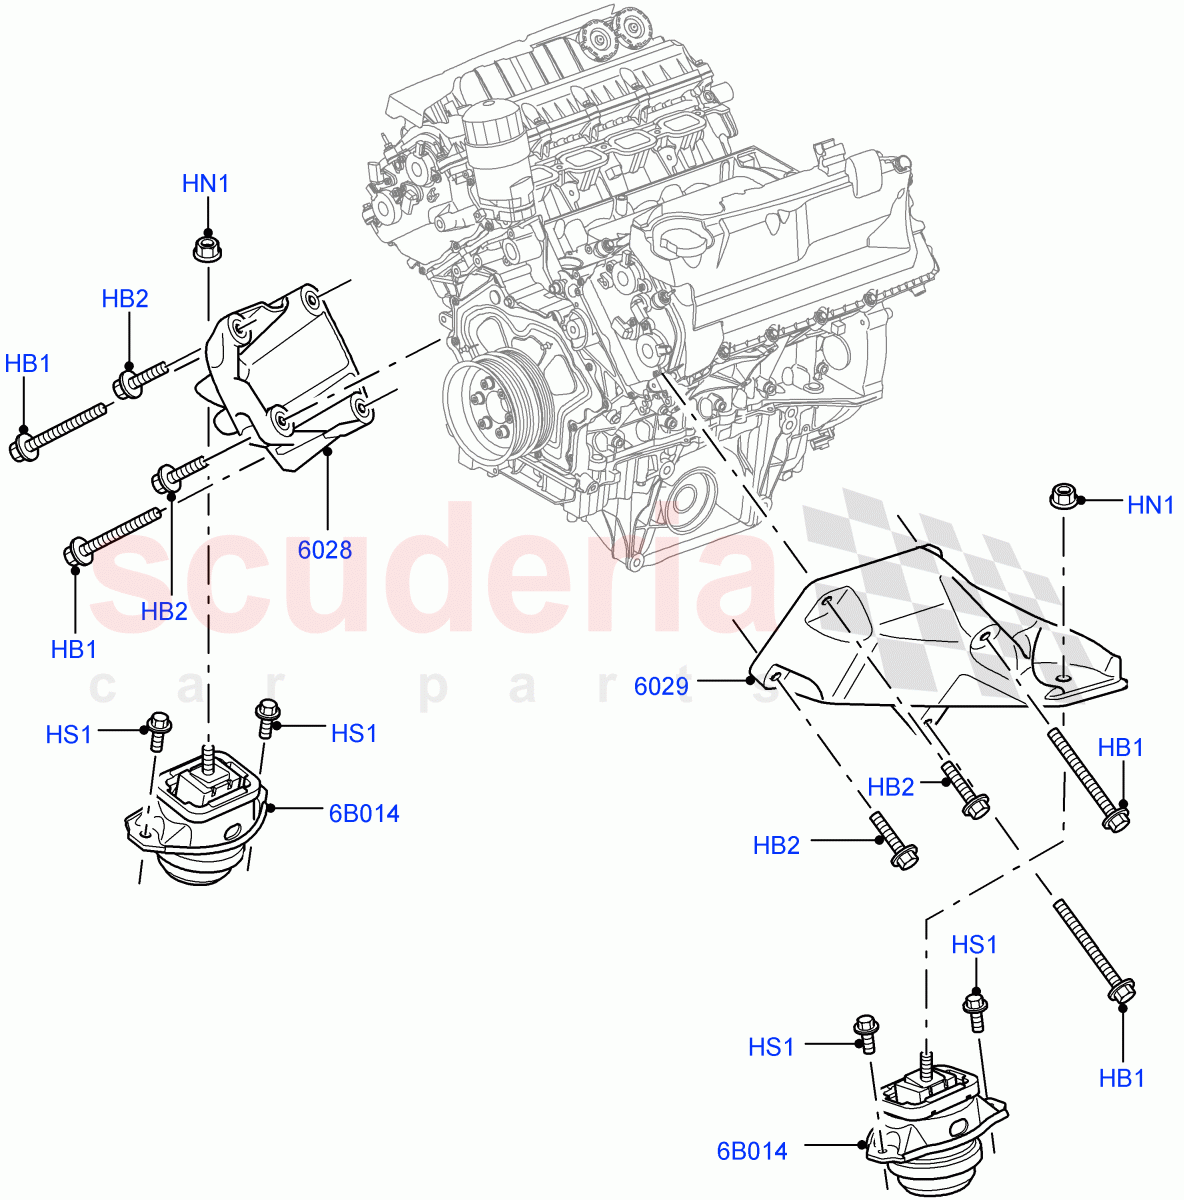 Engine Mounting(5.0L OHC SGDI NA V8 Petrol - AJ133)((V)FROMAA000001) of Land Rover Land Rover Discovery 4 (2010-2016) [3.0 DOHC GDI SC V6 Petrol]